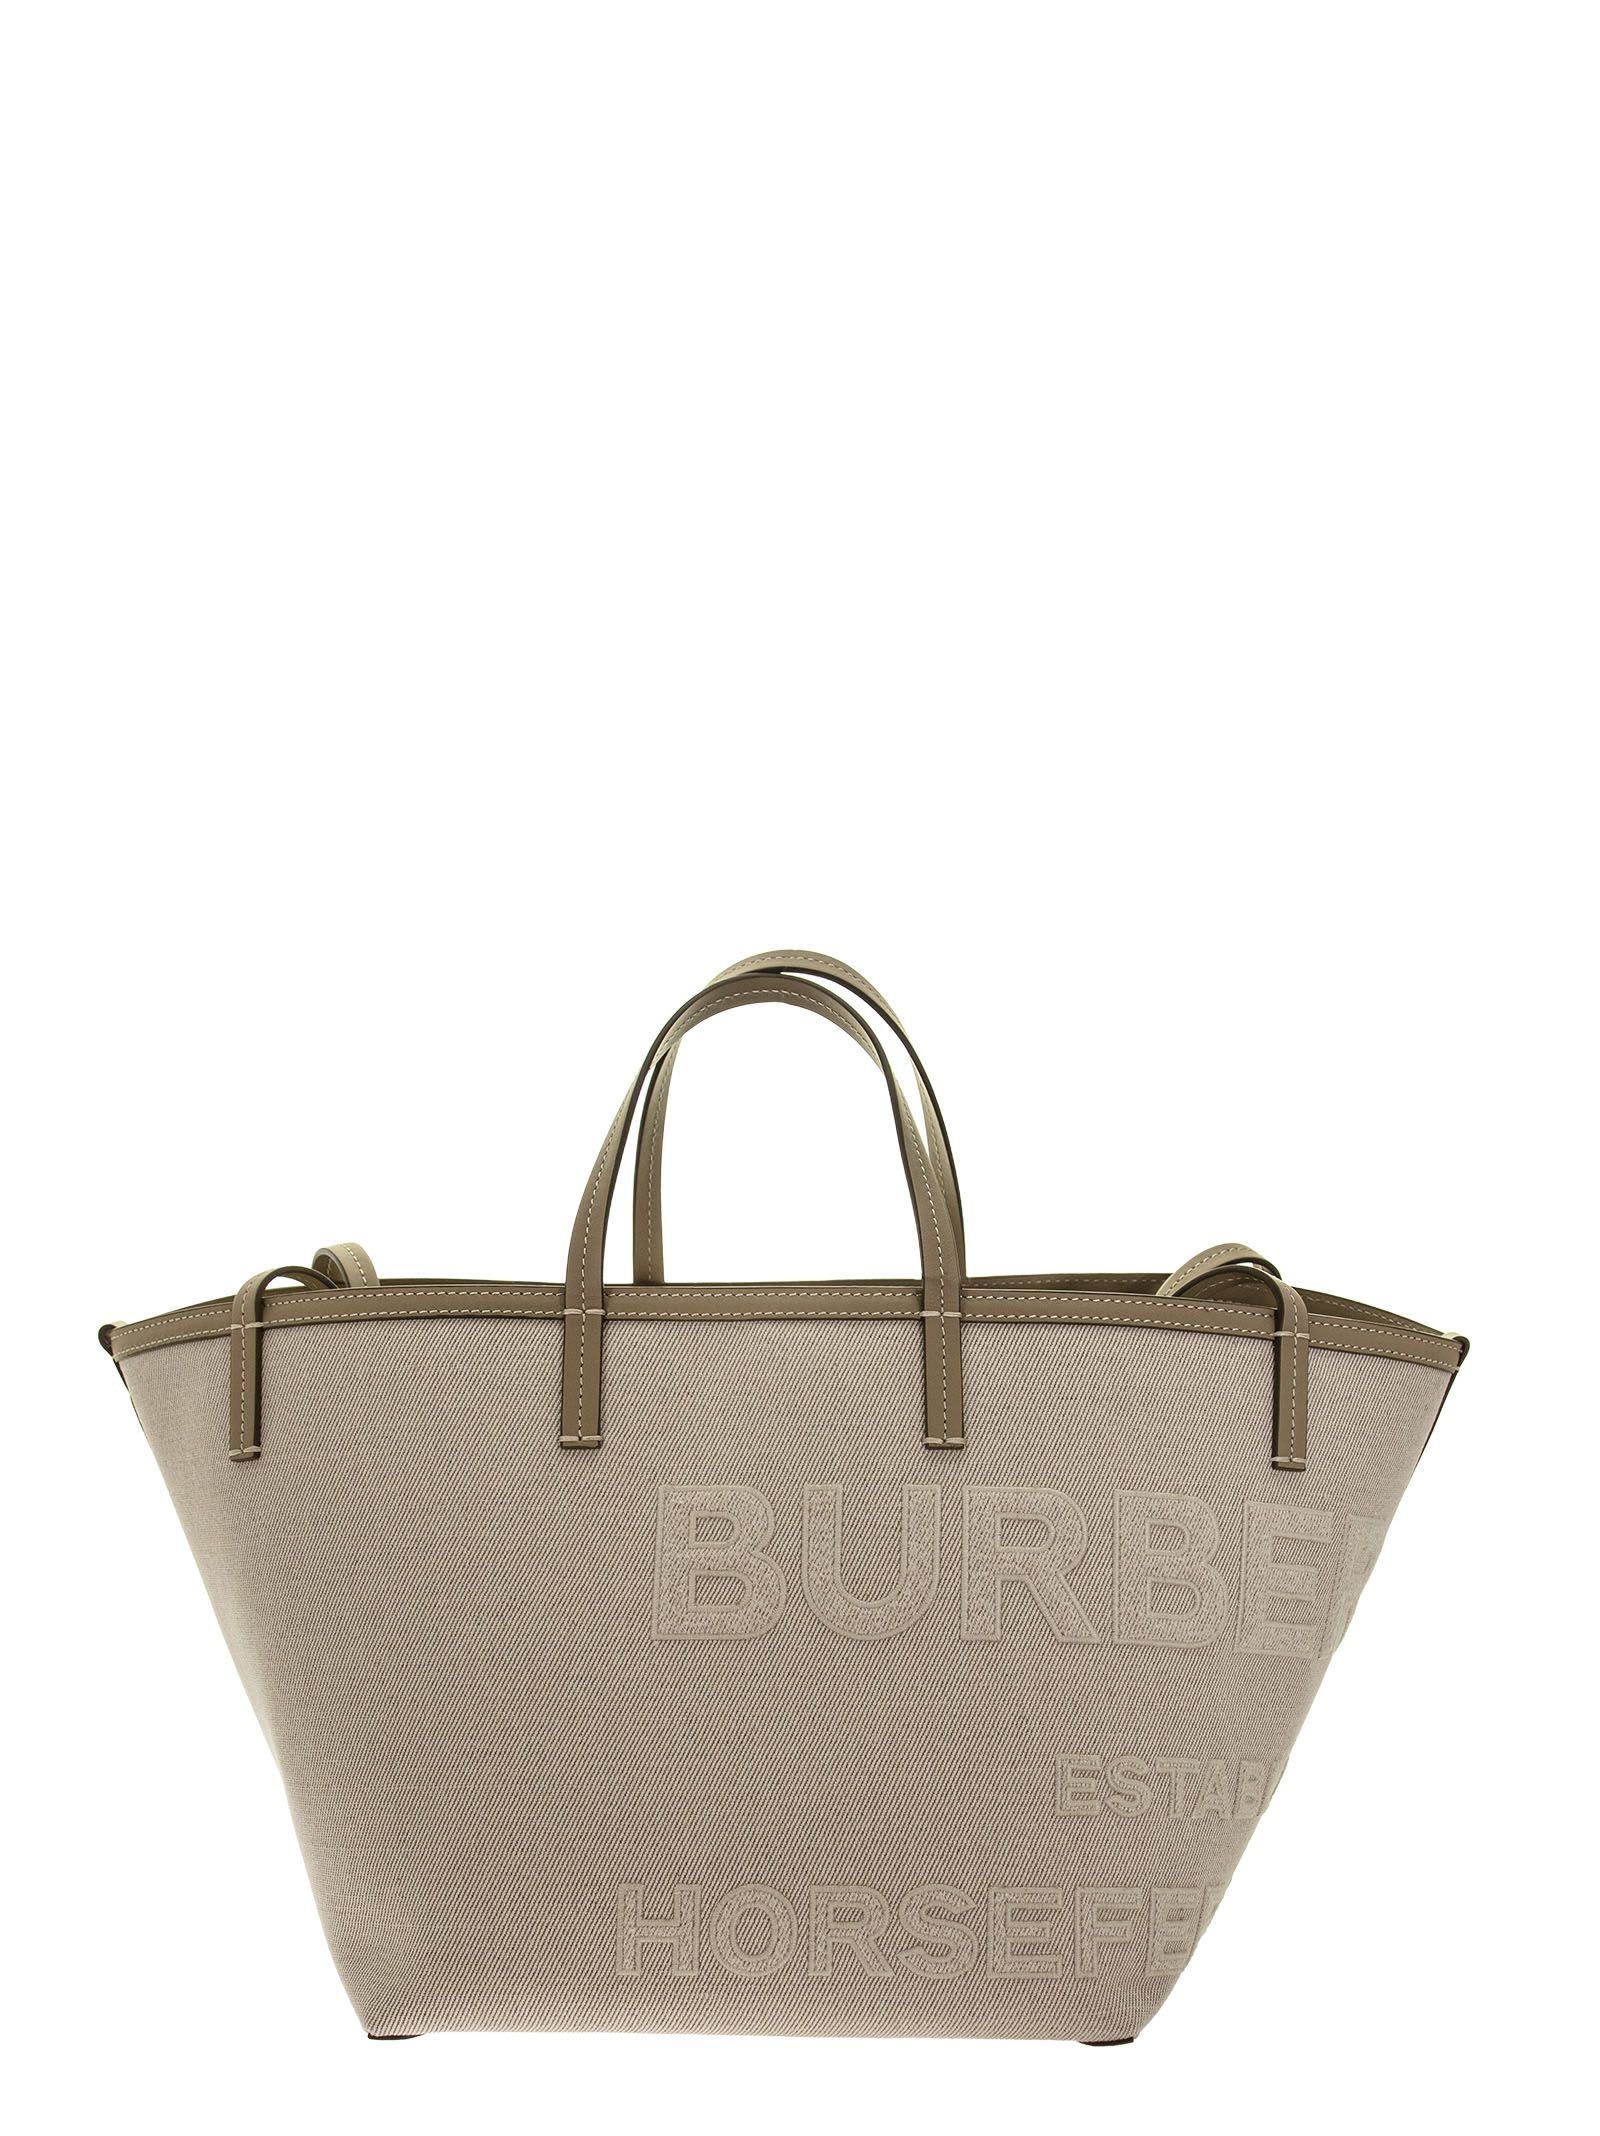 Burberry Mini Beach Tote In Cotton And Linen Canvas With Horseferry Lettering